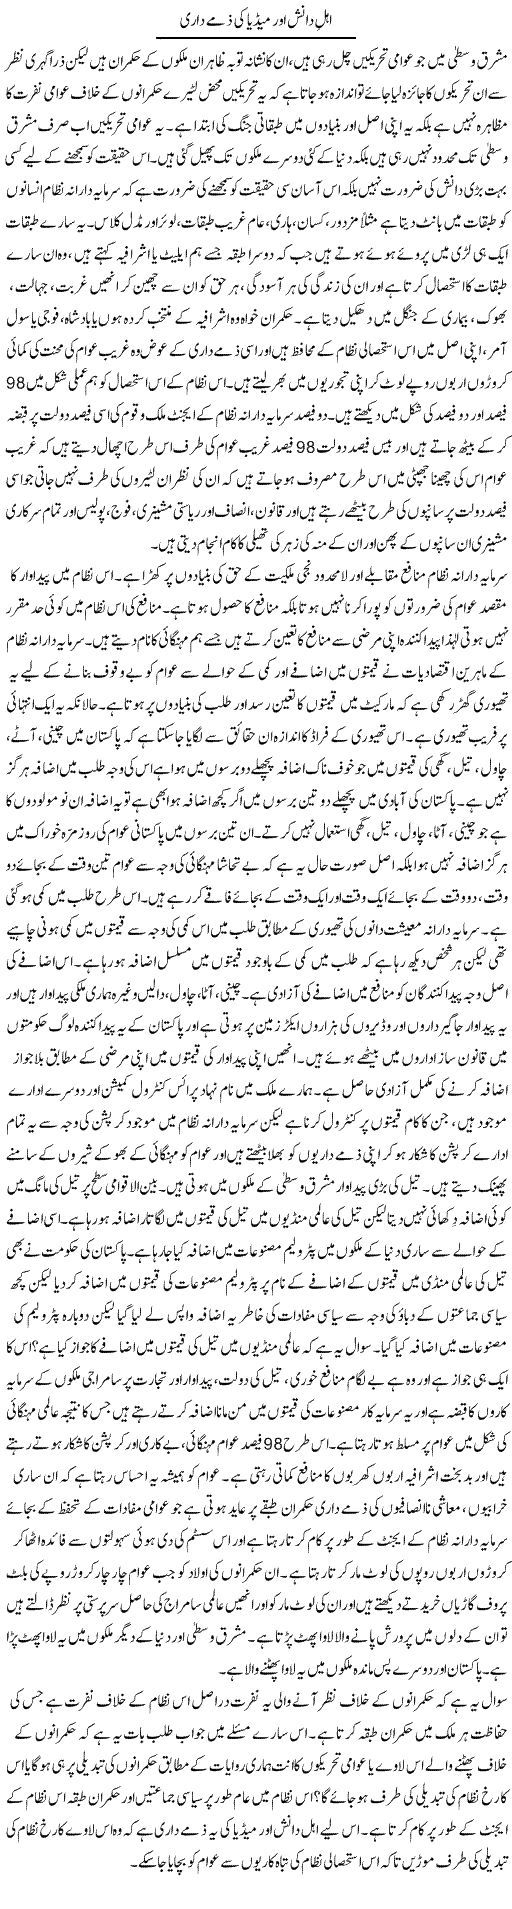 Rulers and Media Express Column Zaheer Akhtar 12 March 2011